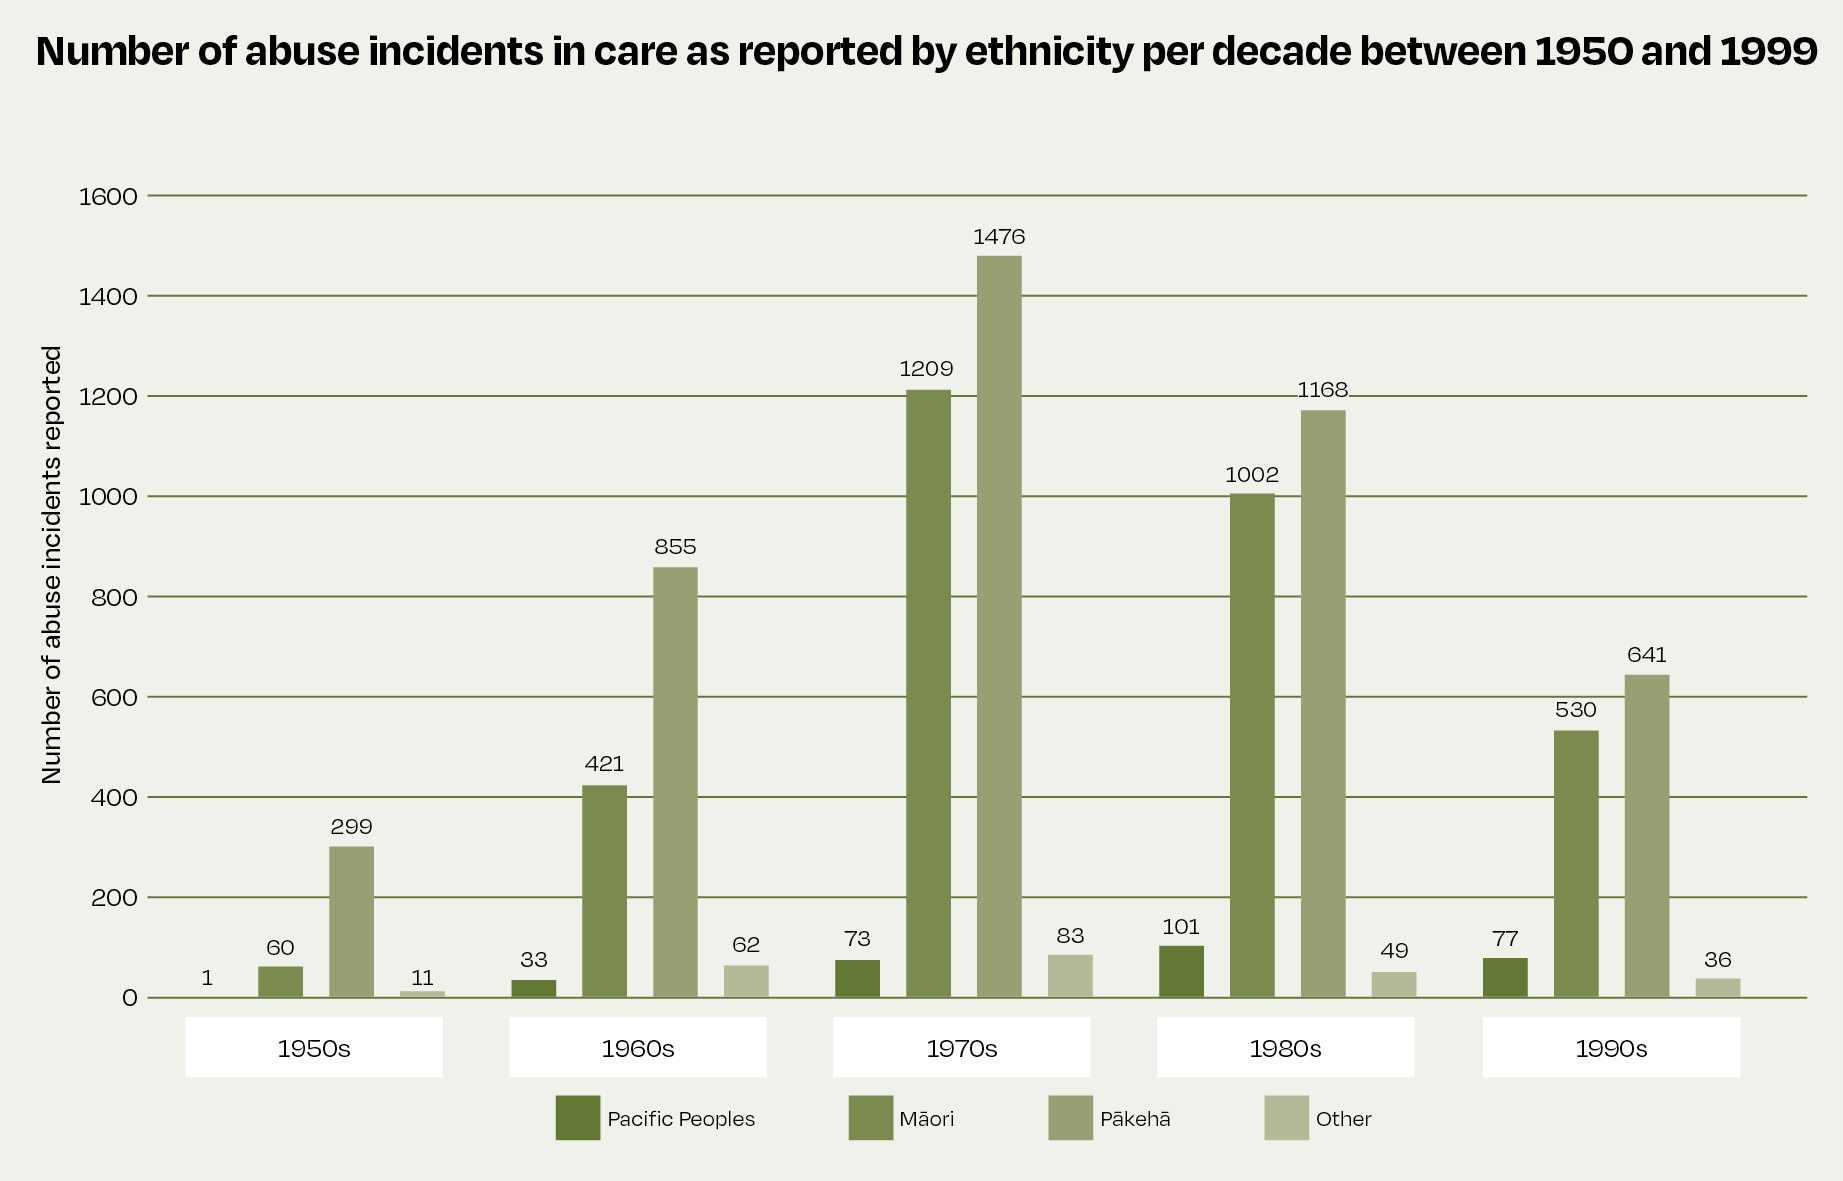 This bar graph shows the number of abuse incidents experienced by Pacific Peoples, Māori, Pākehā and other ethnicities in care per decade between 1950 and 1999. In the 1950s, 60 Māori and 299 Pākehā experienced abuse. In the 1960s, 33 Pacific Peoples, 421 Māori, 855 Pākehā and 62 other ethnicities experienced abuse. In the 1970s, 73 Pacific Peoples, 1,209 Māori, 1,476 Pākehā and 83 other ethnicities experienced abuse. In the 1980s, 101 Pacific Peoples, 1,002 Māori, 1,168 Pākehā and 49 other ethnicities experienced abuse. In the 1990s, 77 Pacific Peoples, 530 Māori, 641 Pākehā and 36 other ethnicities experienced abuse. 